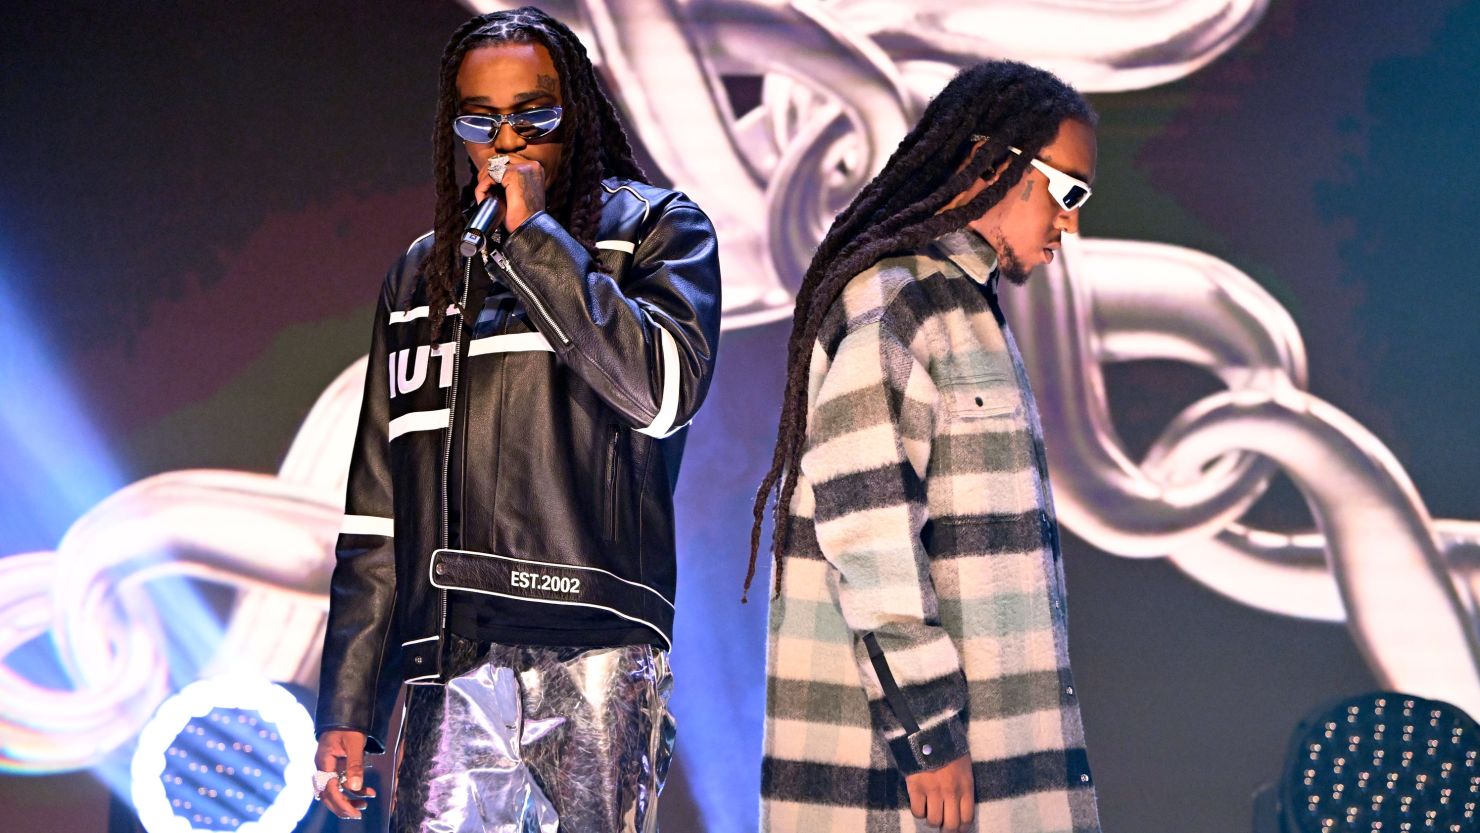 Quavo & Takeoff perform on "The Tonight Show Starring Jimmy Fallon" on October 6, 2022.